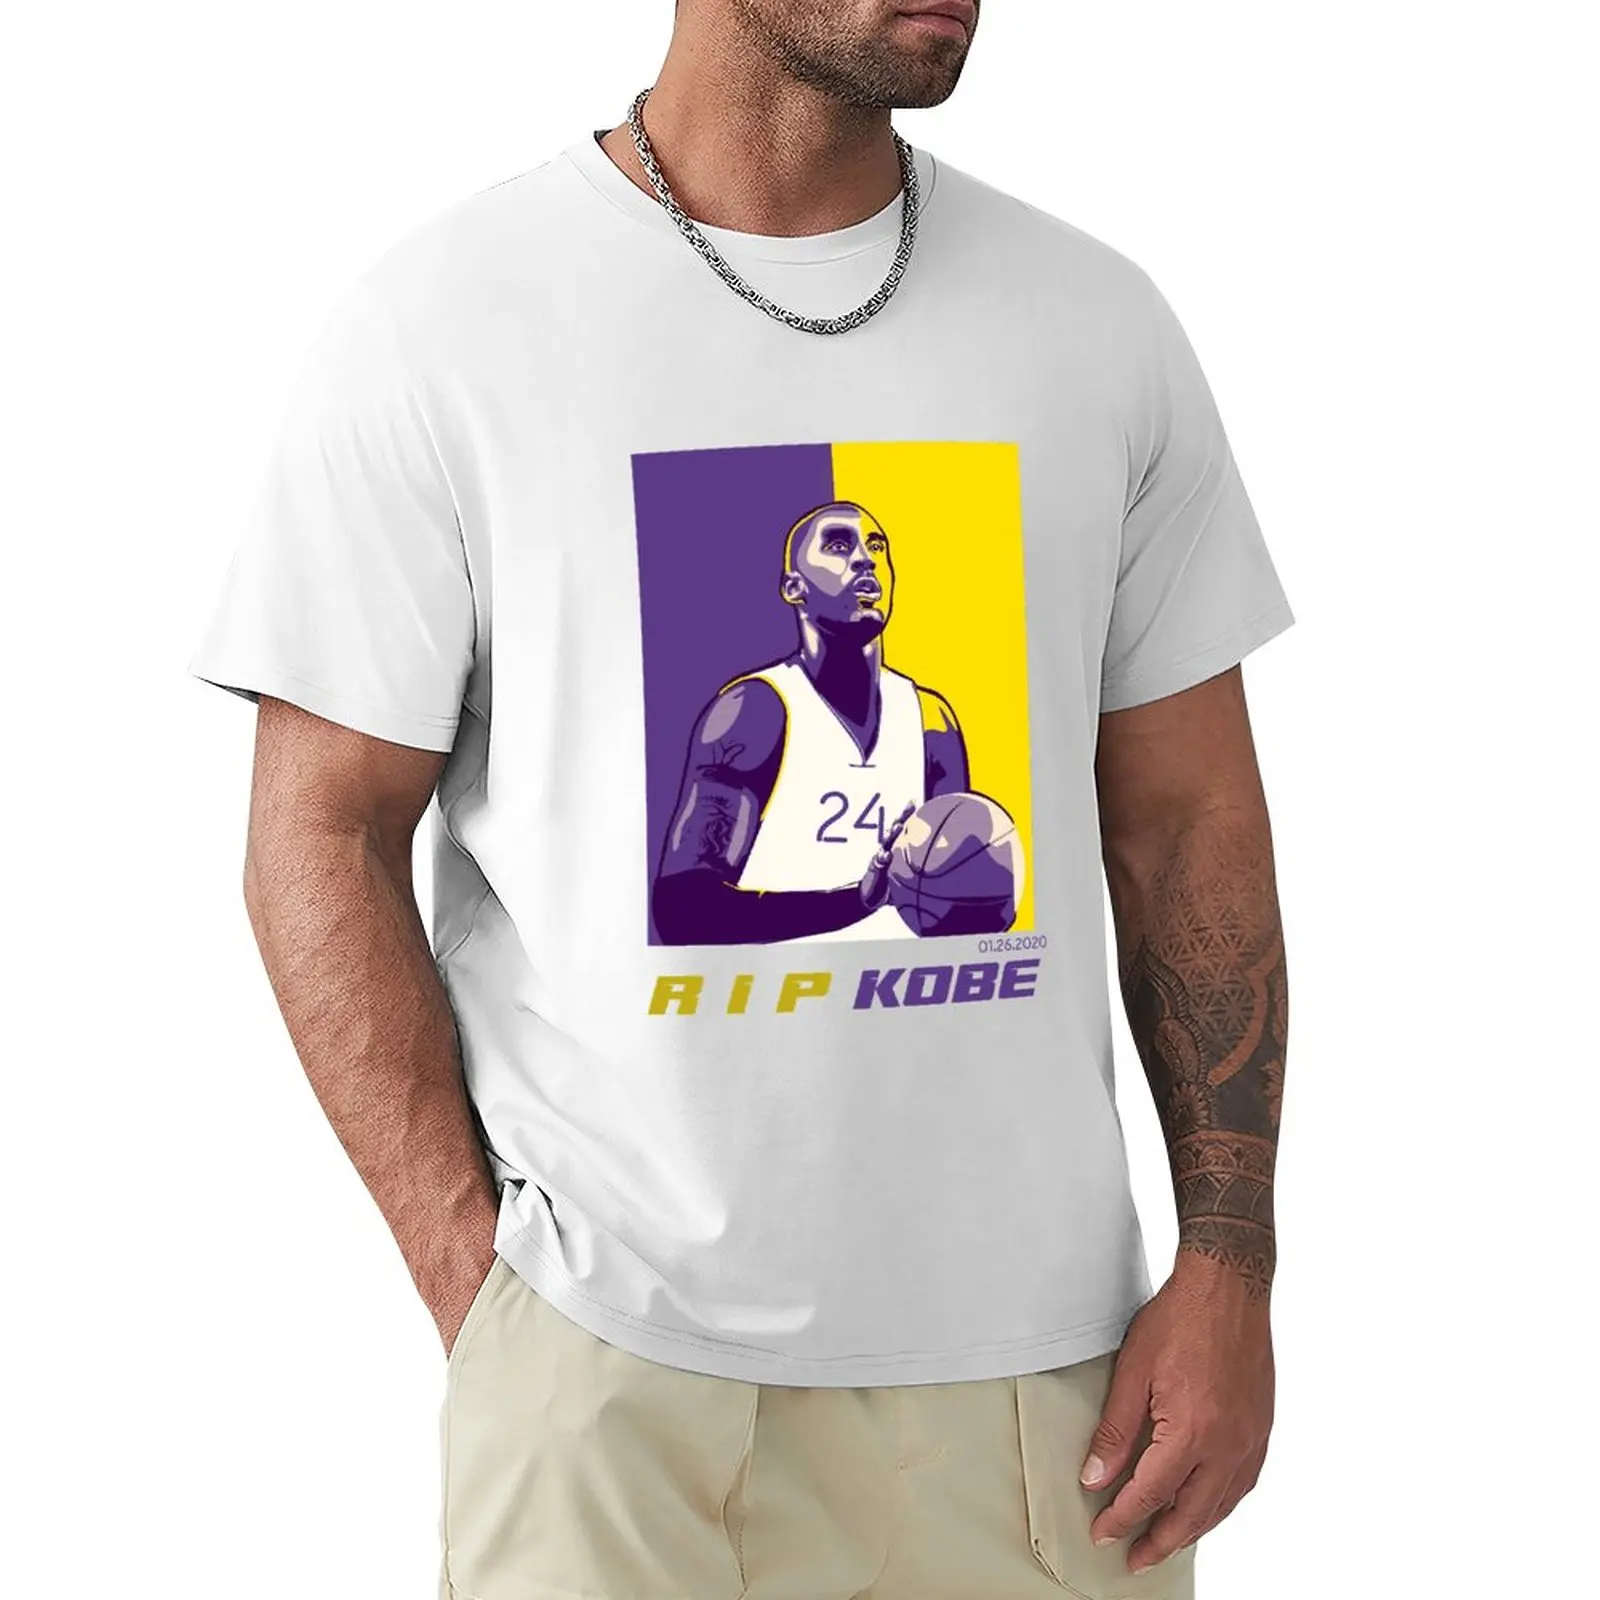 Rip kobe bryant mamba out 24 Rest In Peace Memorial legend T-Shirt sweat  shirt anime clothes mens cotton t shirts - AliExpress